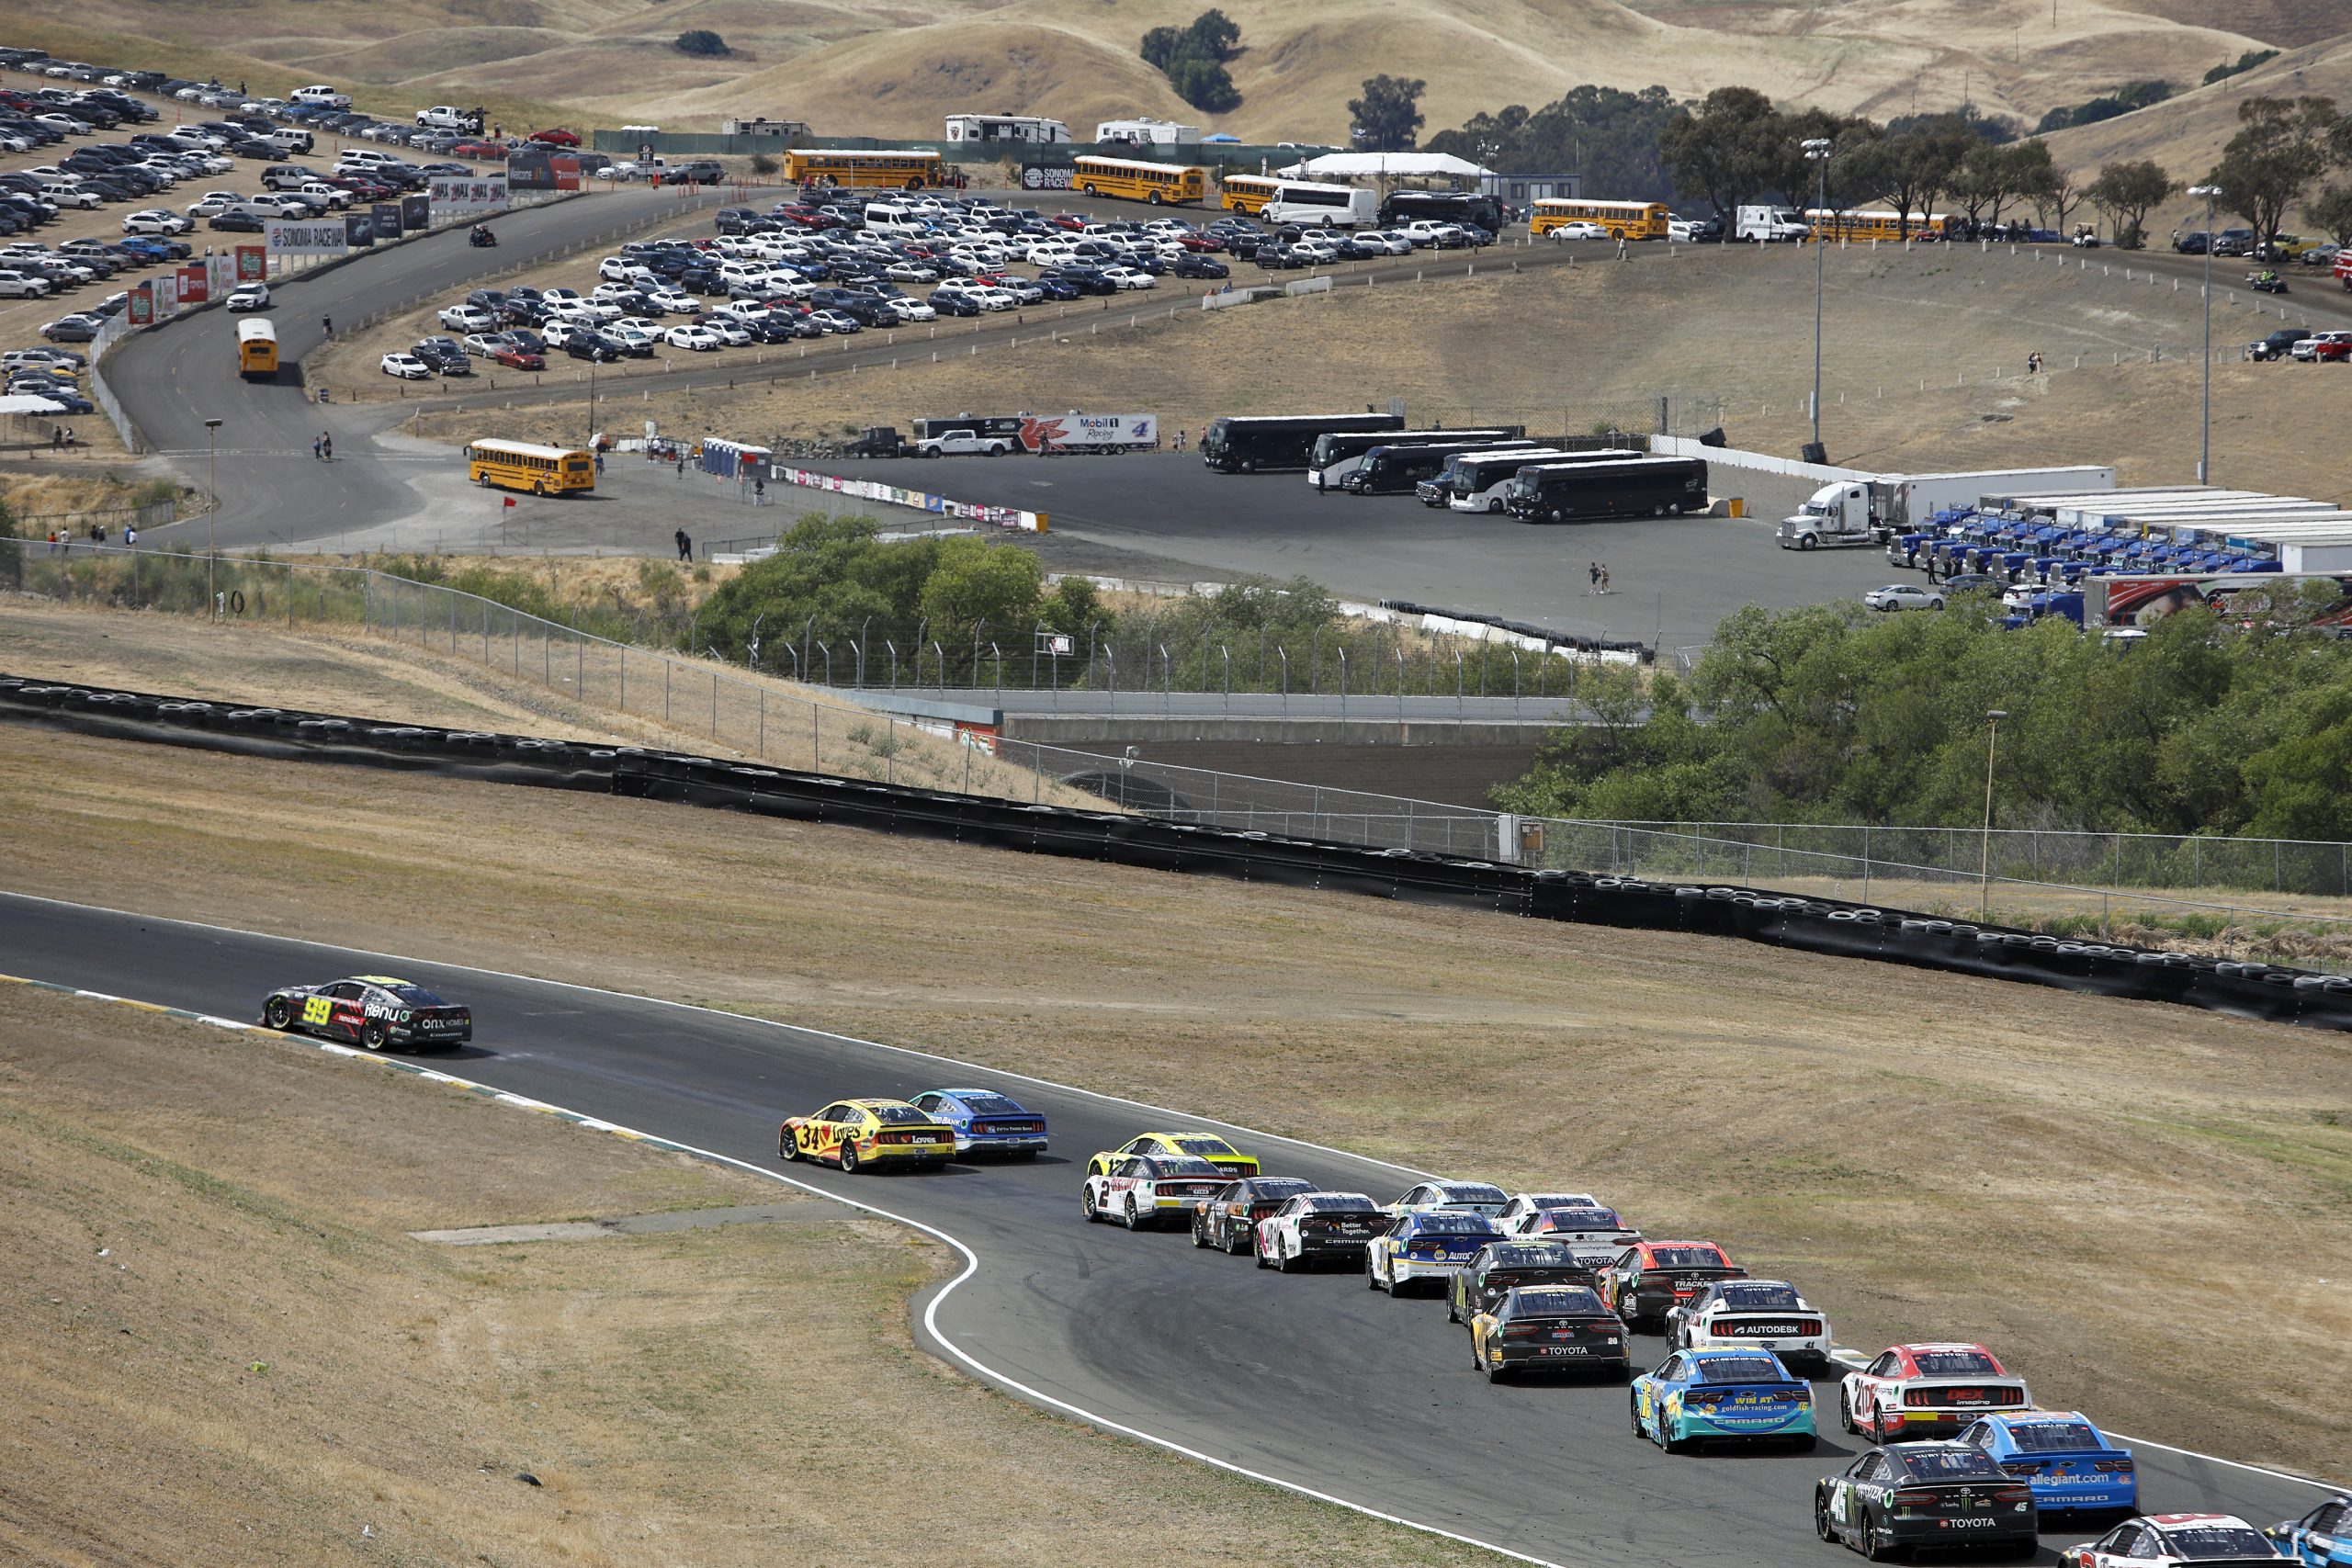 SONOMA, CALIFORNIA - JUNE 12: Daniel Suarez, driver of the #99 Onx Homes/Renu Chevrolet, leads the field during the NASCAR Cup Series Toyota/Save Mart 350 at Sonoma Raceway on June 12, 2022 in Sonoma, California. (Photo by Sean Gardner/Getty Images)